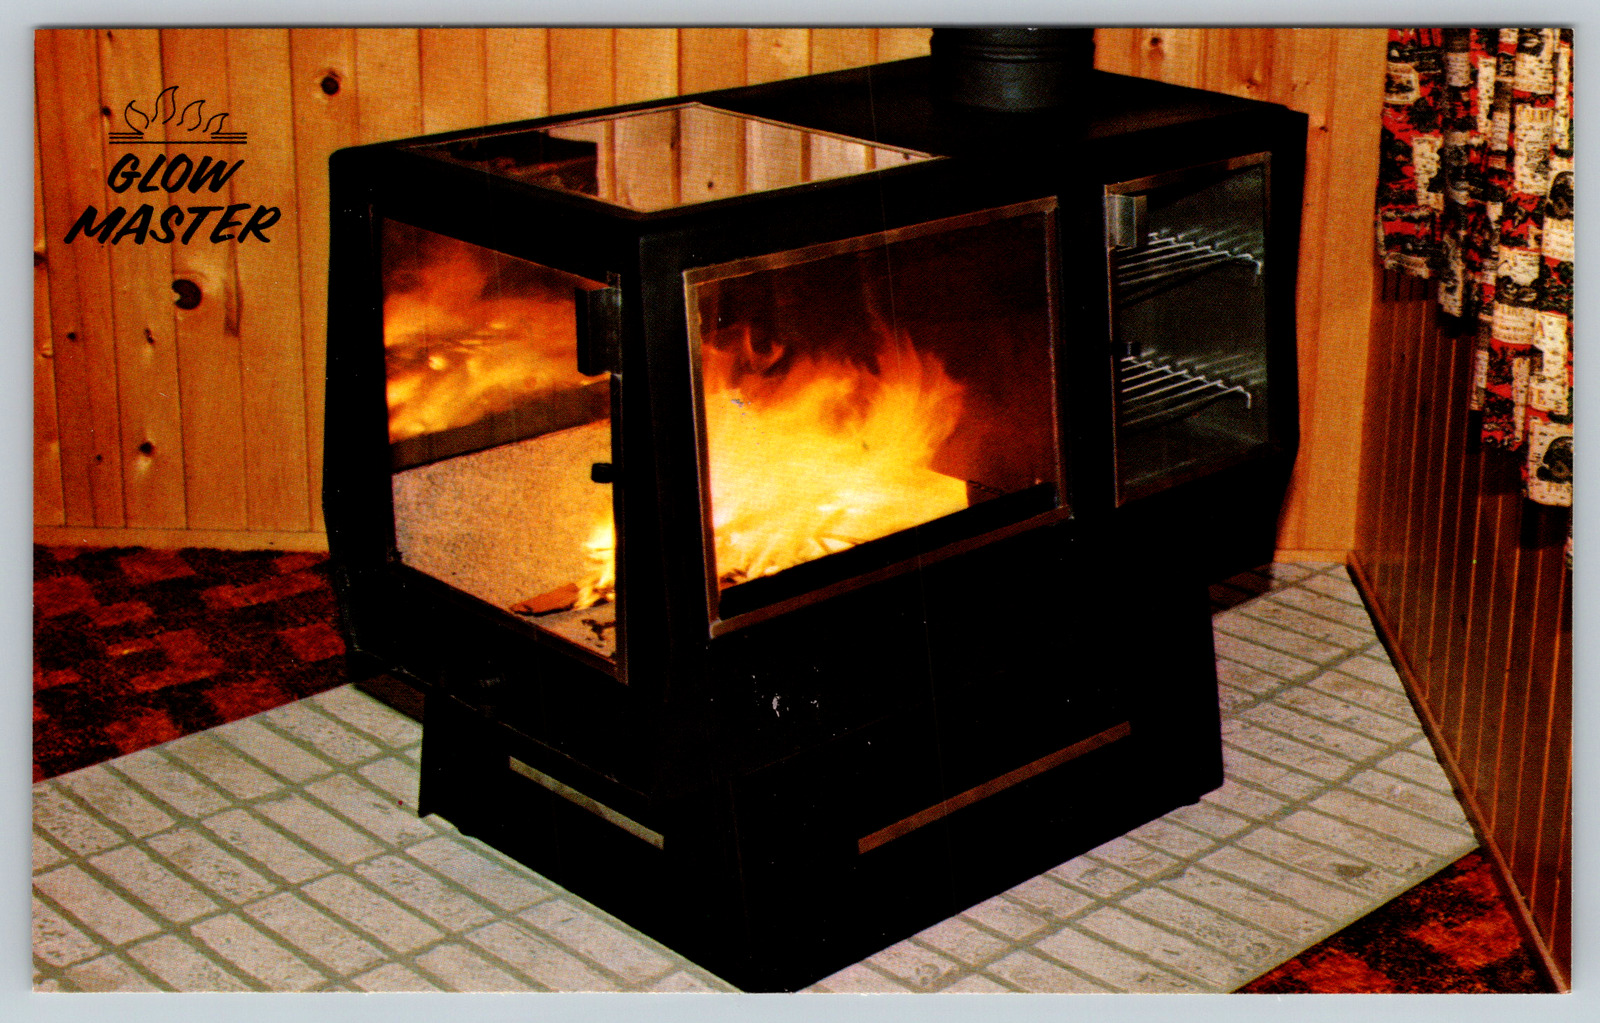 c1960s Glowmaster Glass Fireplace Armstrong Iowa Rubber Vintage Postcard